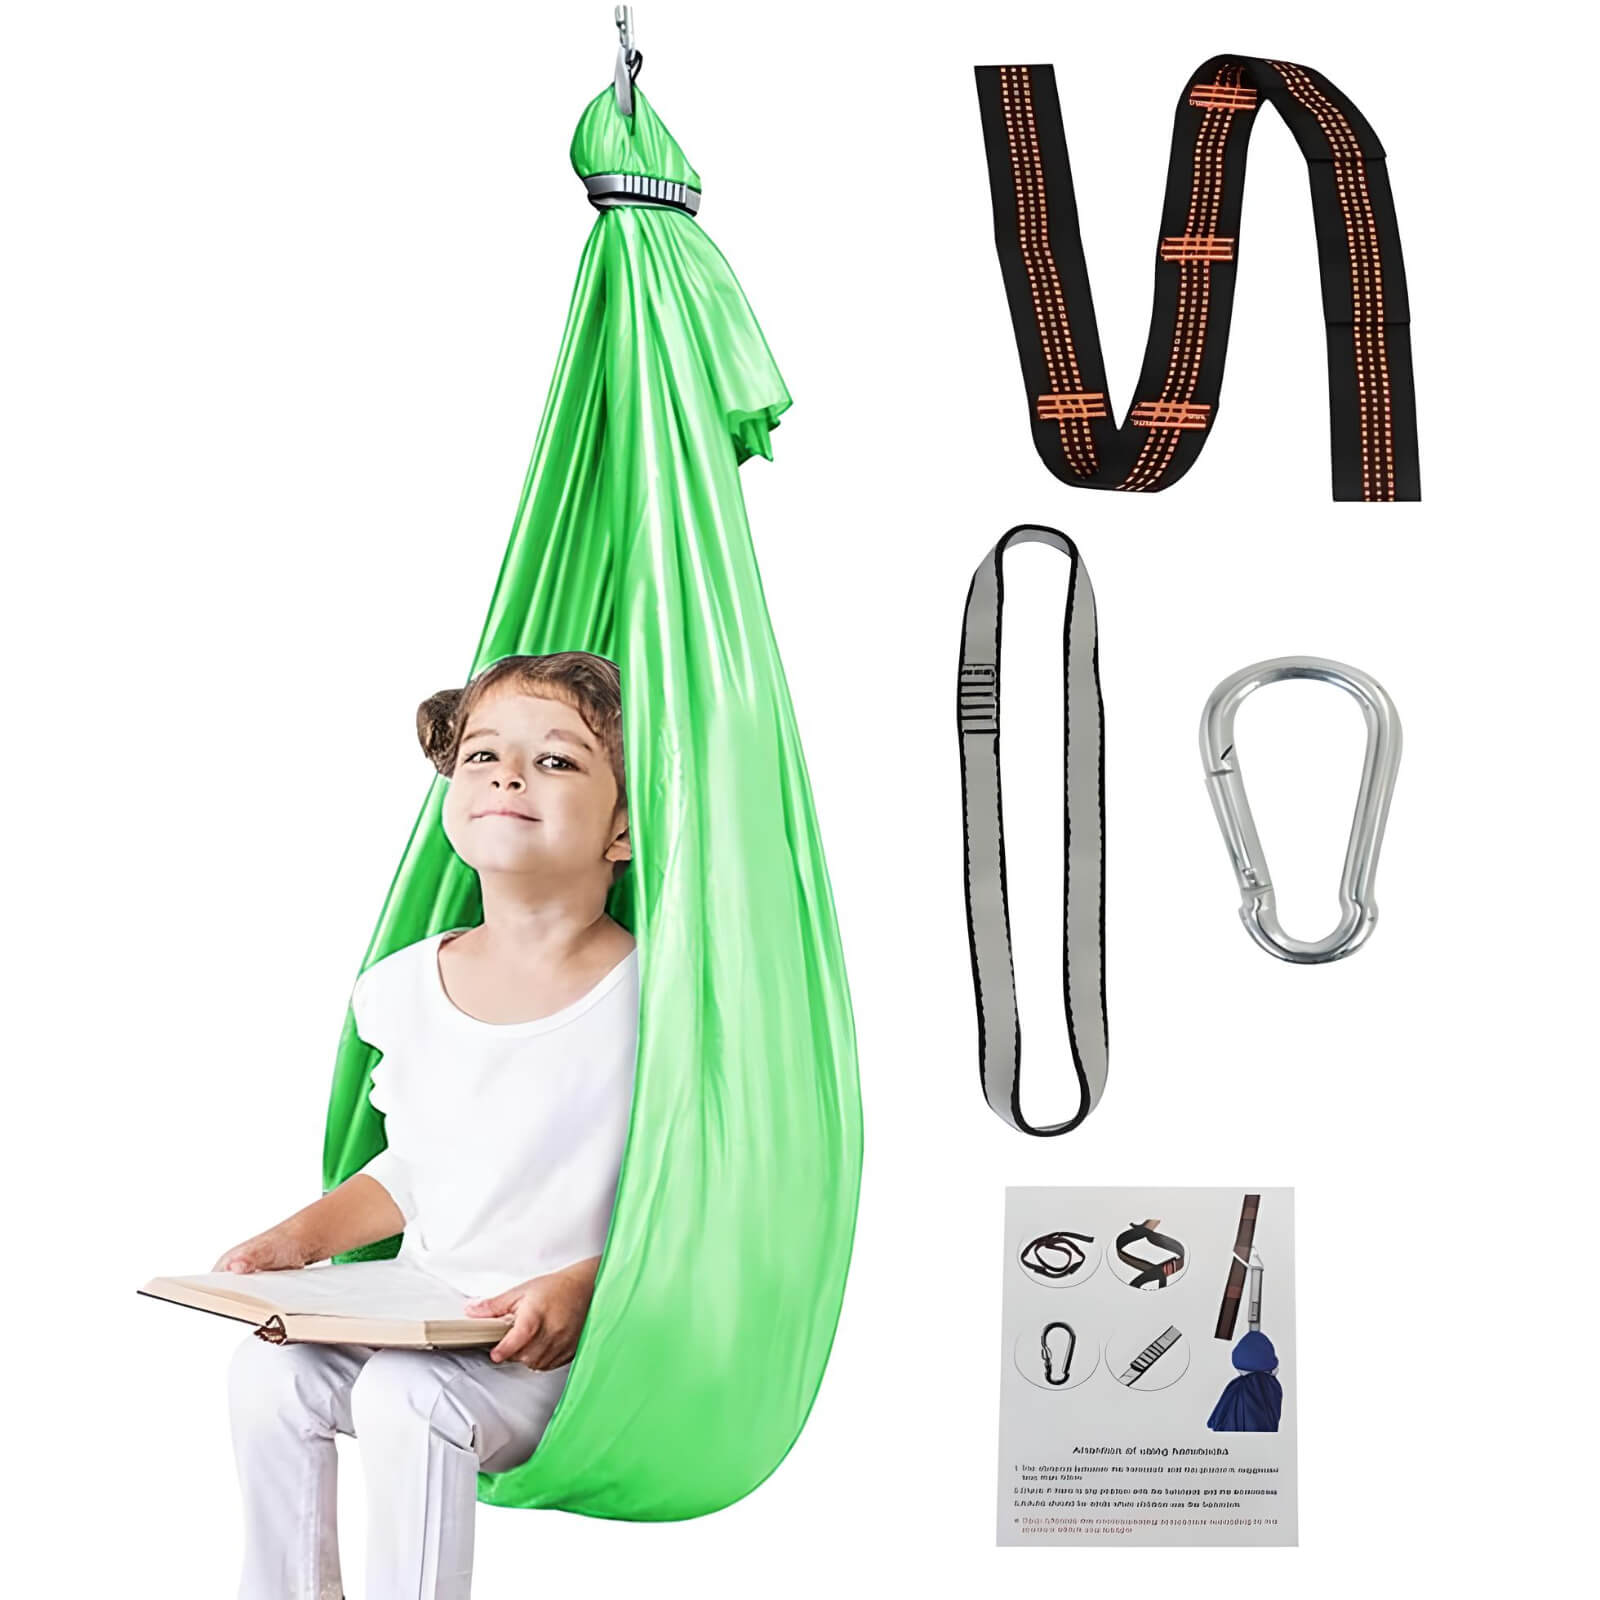 cuddle-swing-with-items